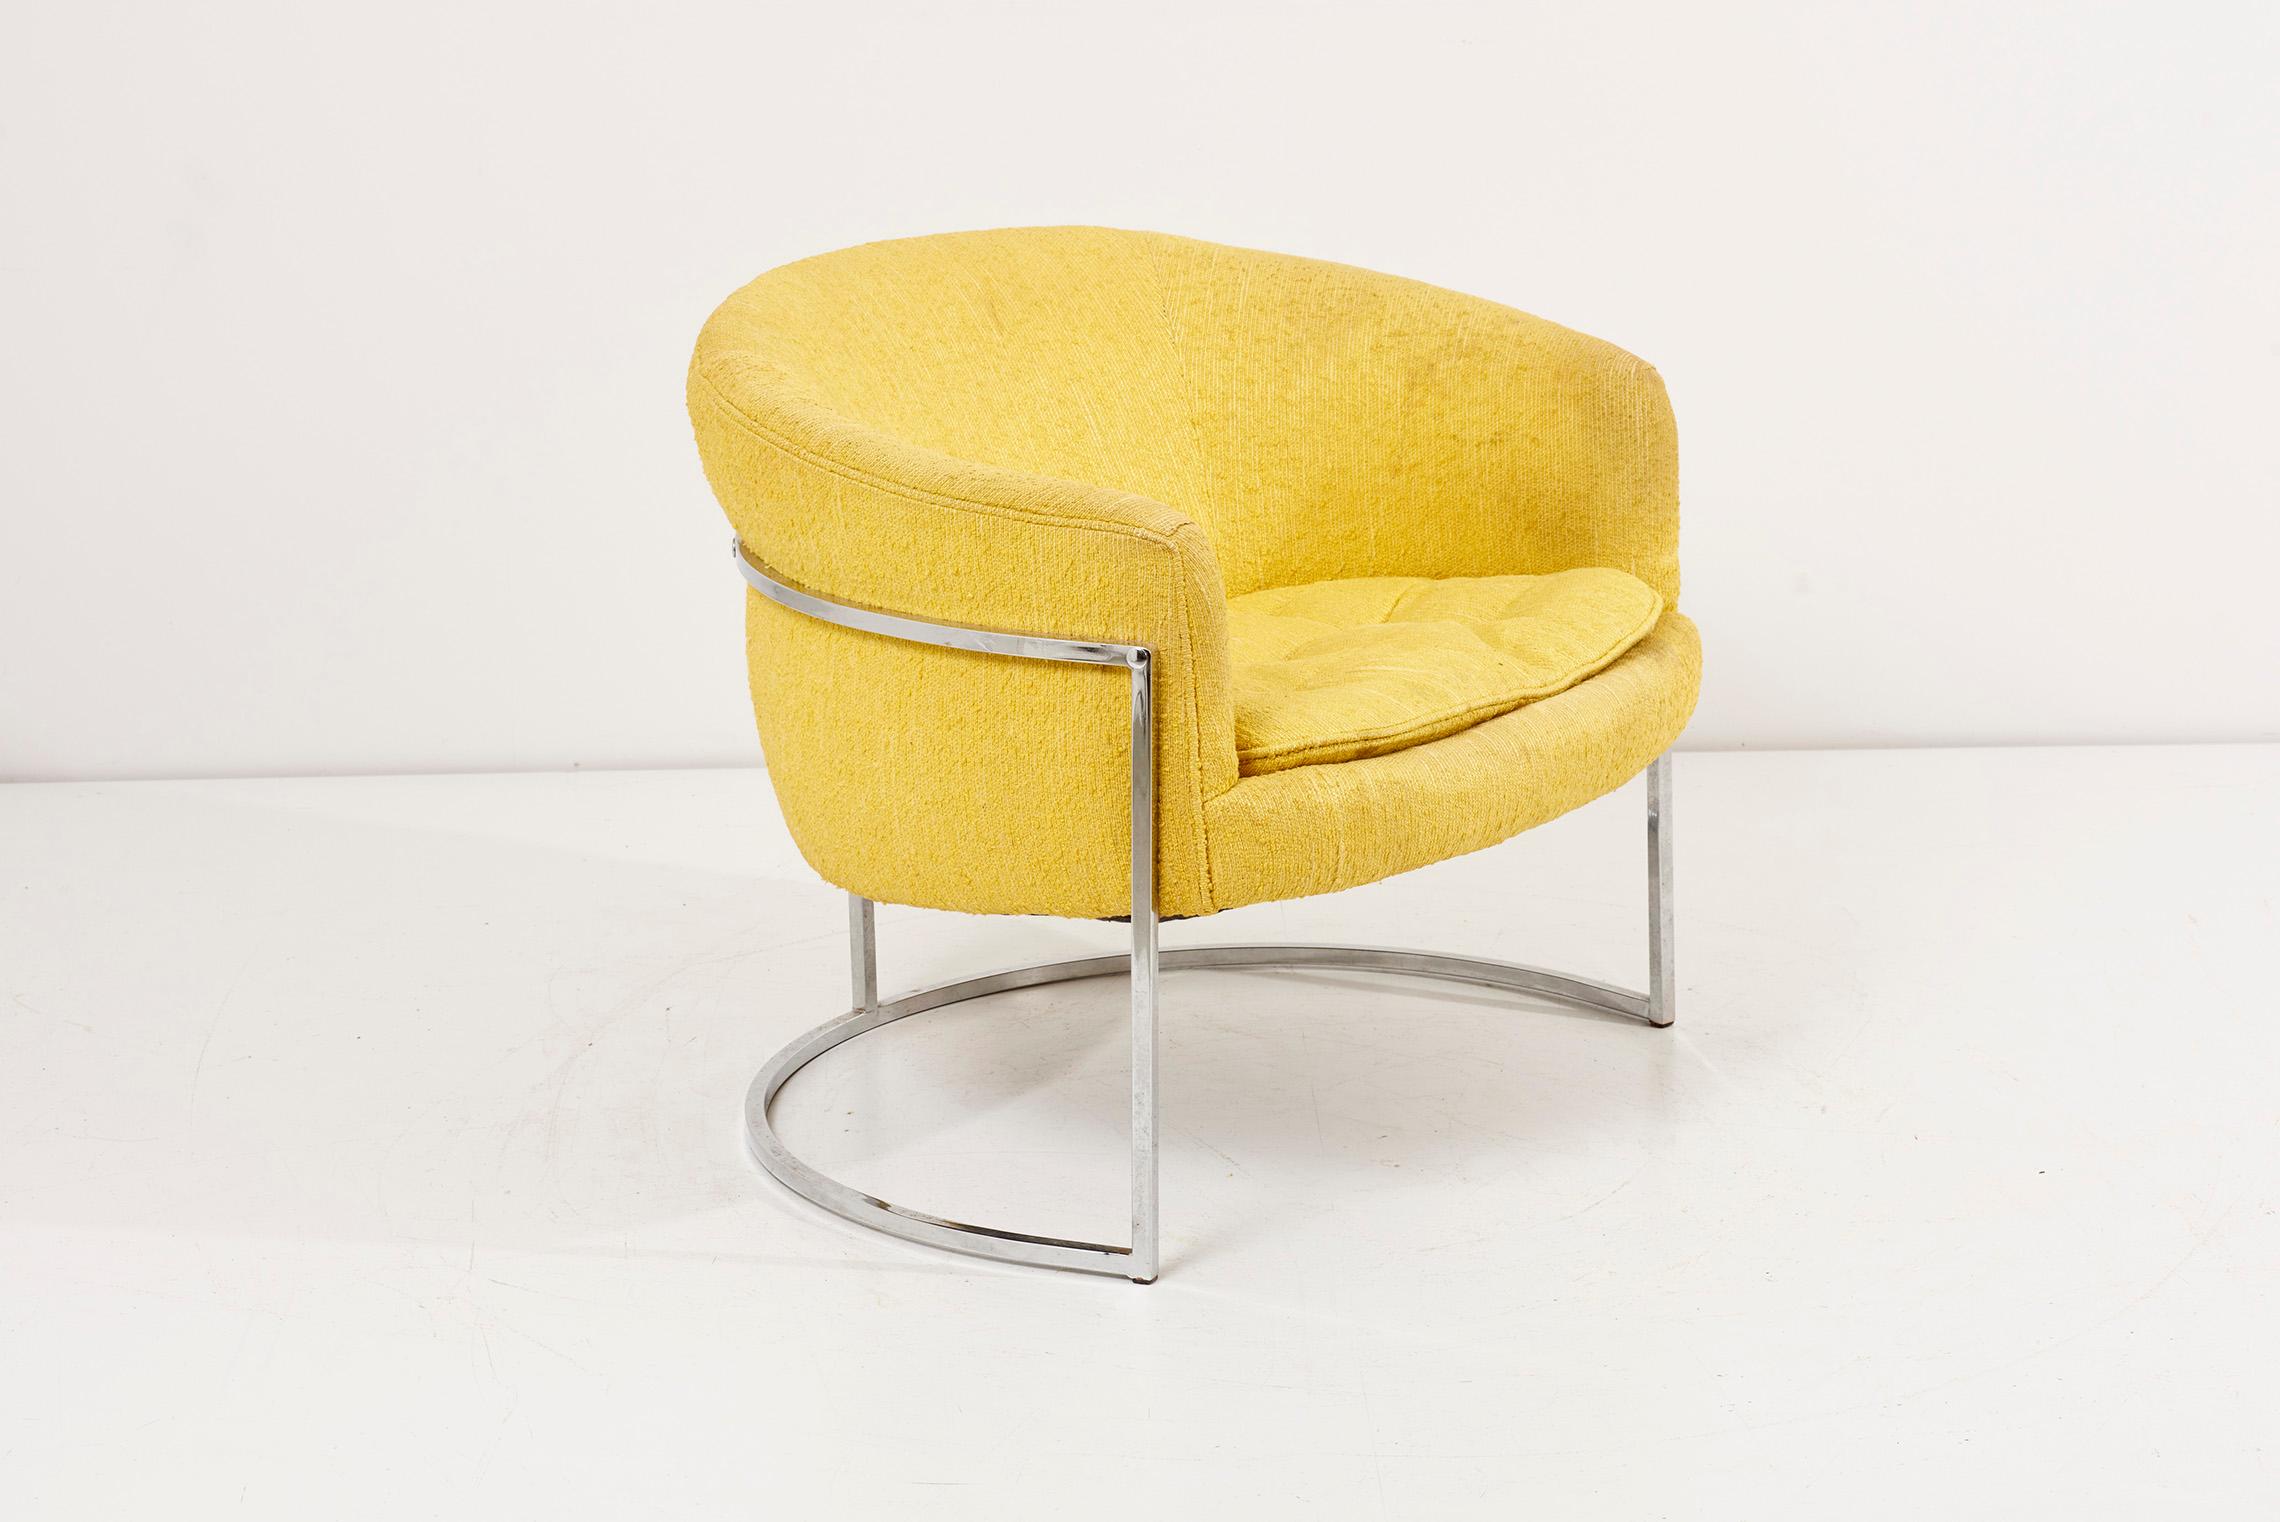 Pair of yellow Bernhadt Lounge Chairs, USA, 1960s For Sale 7